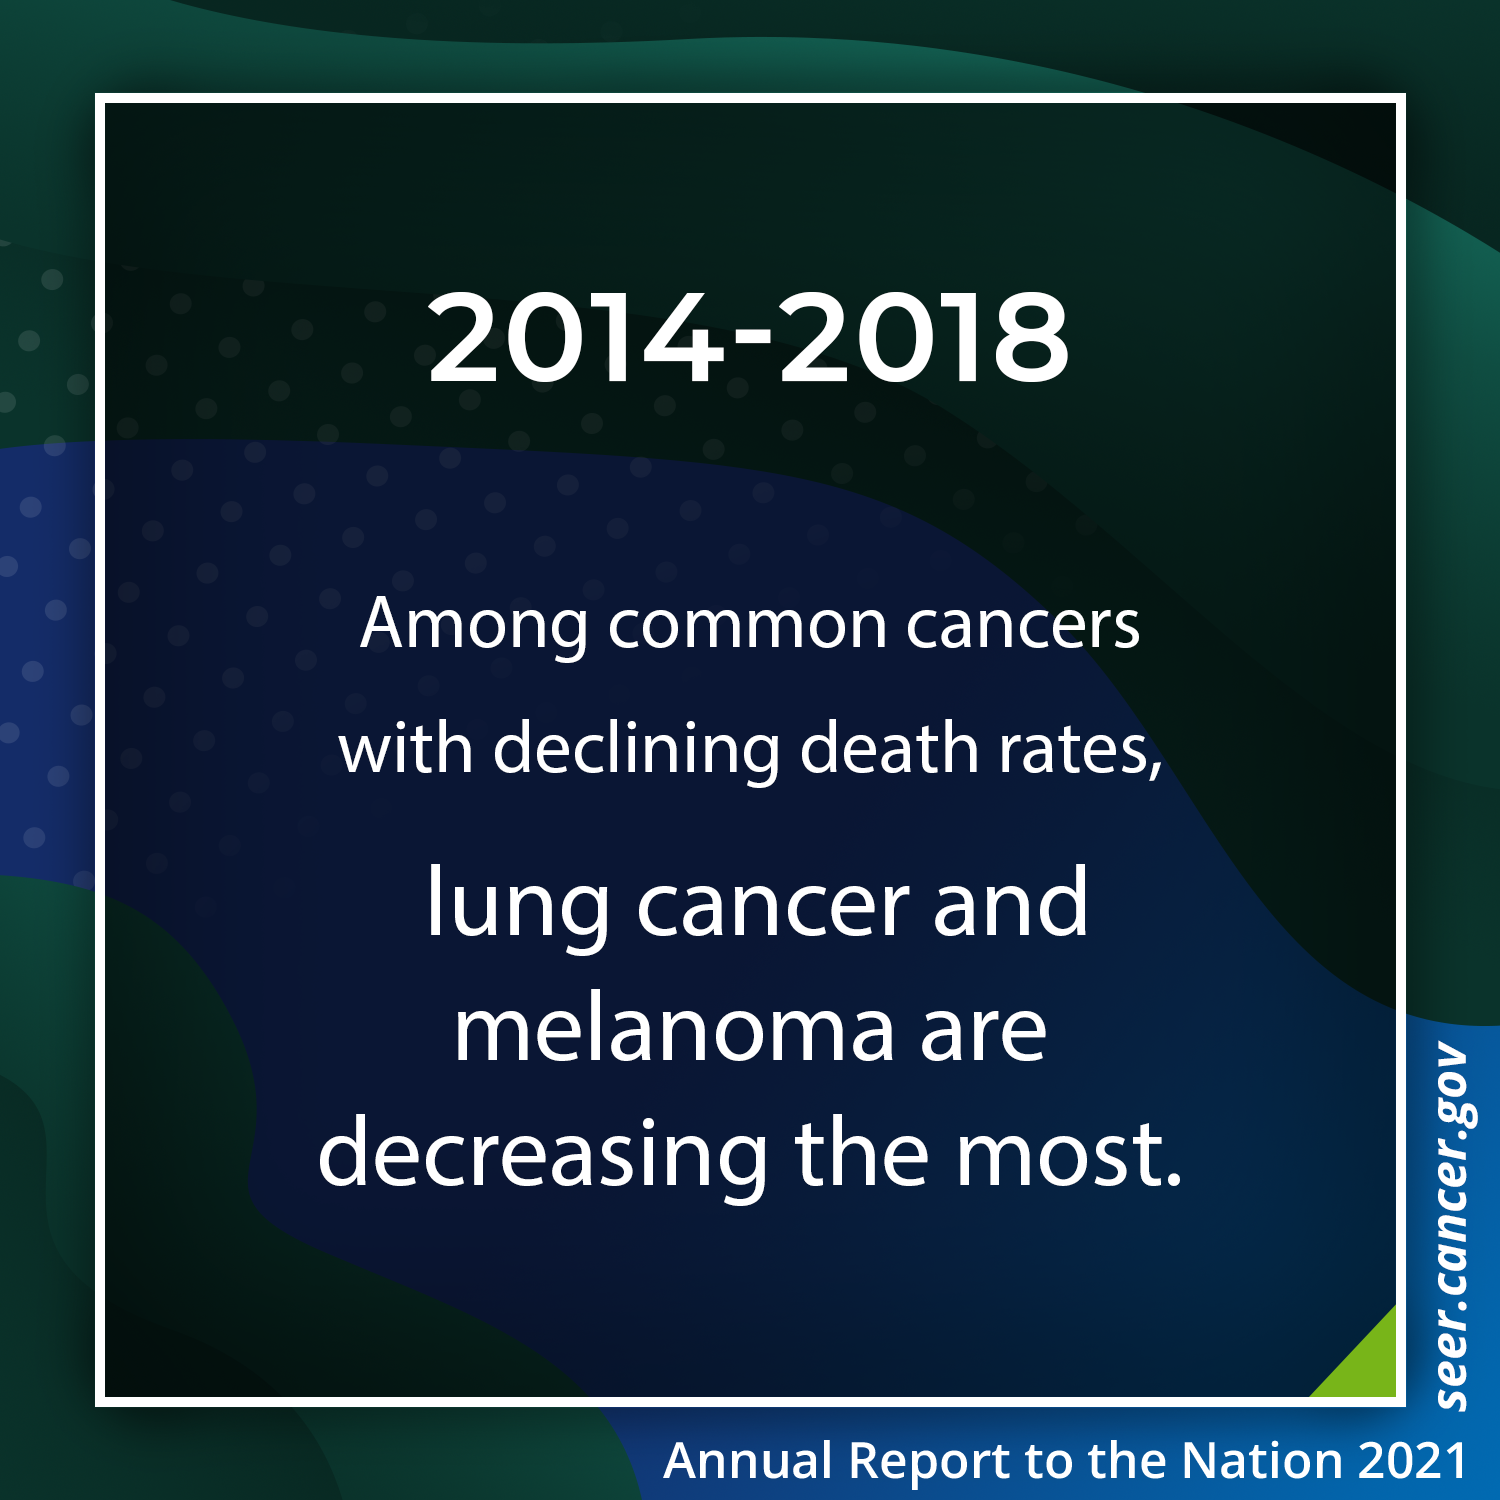 Among common cancers with declining death rates, lung cancer and melanoma are decreasing the most. 